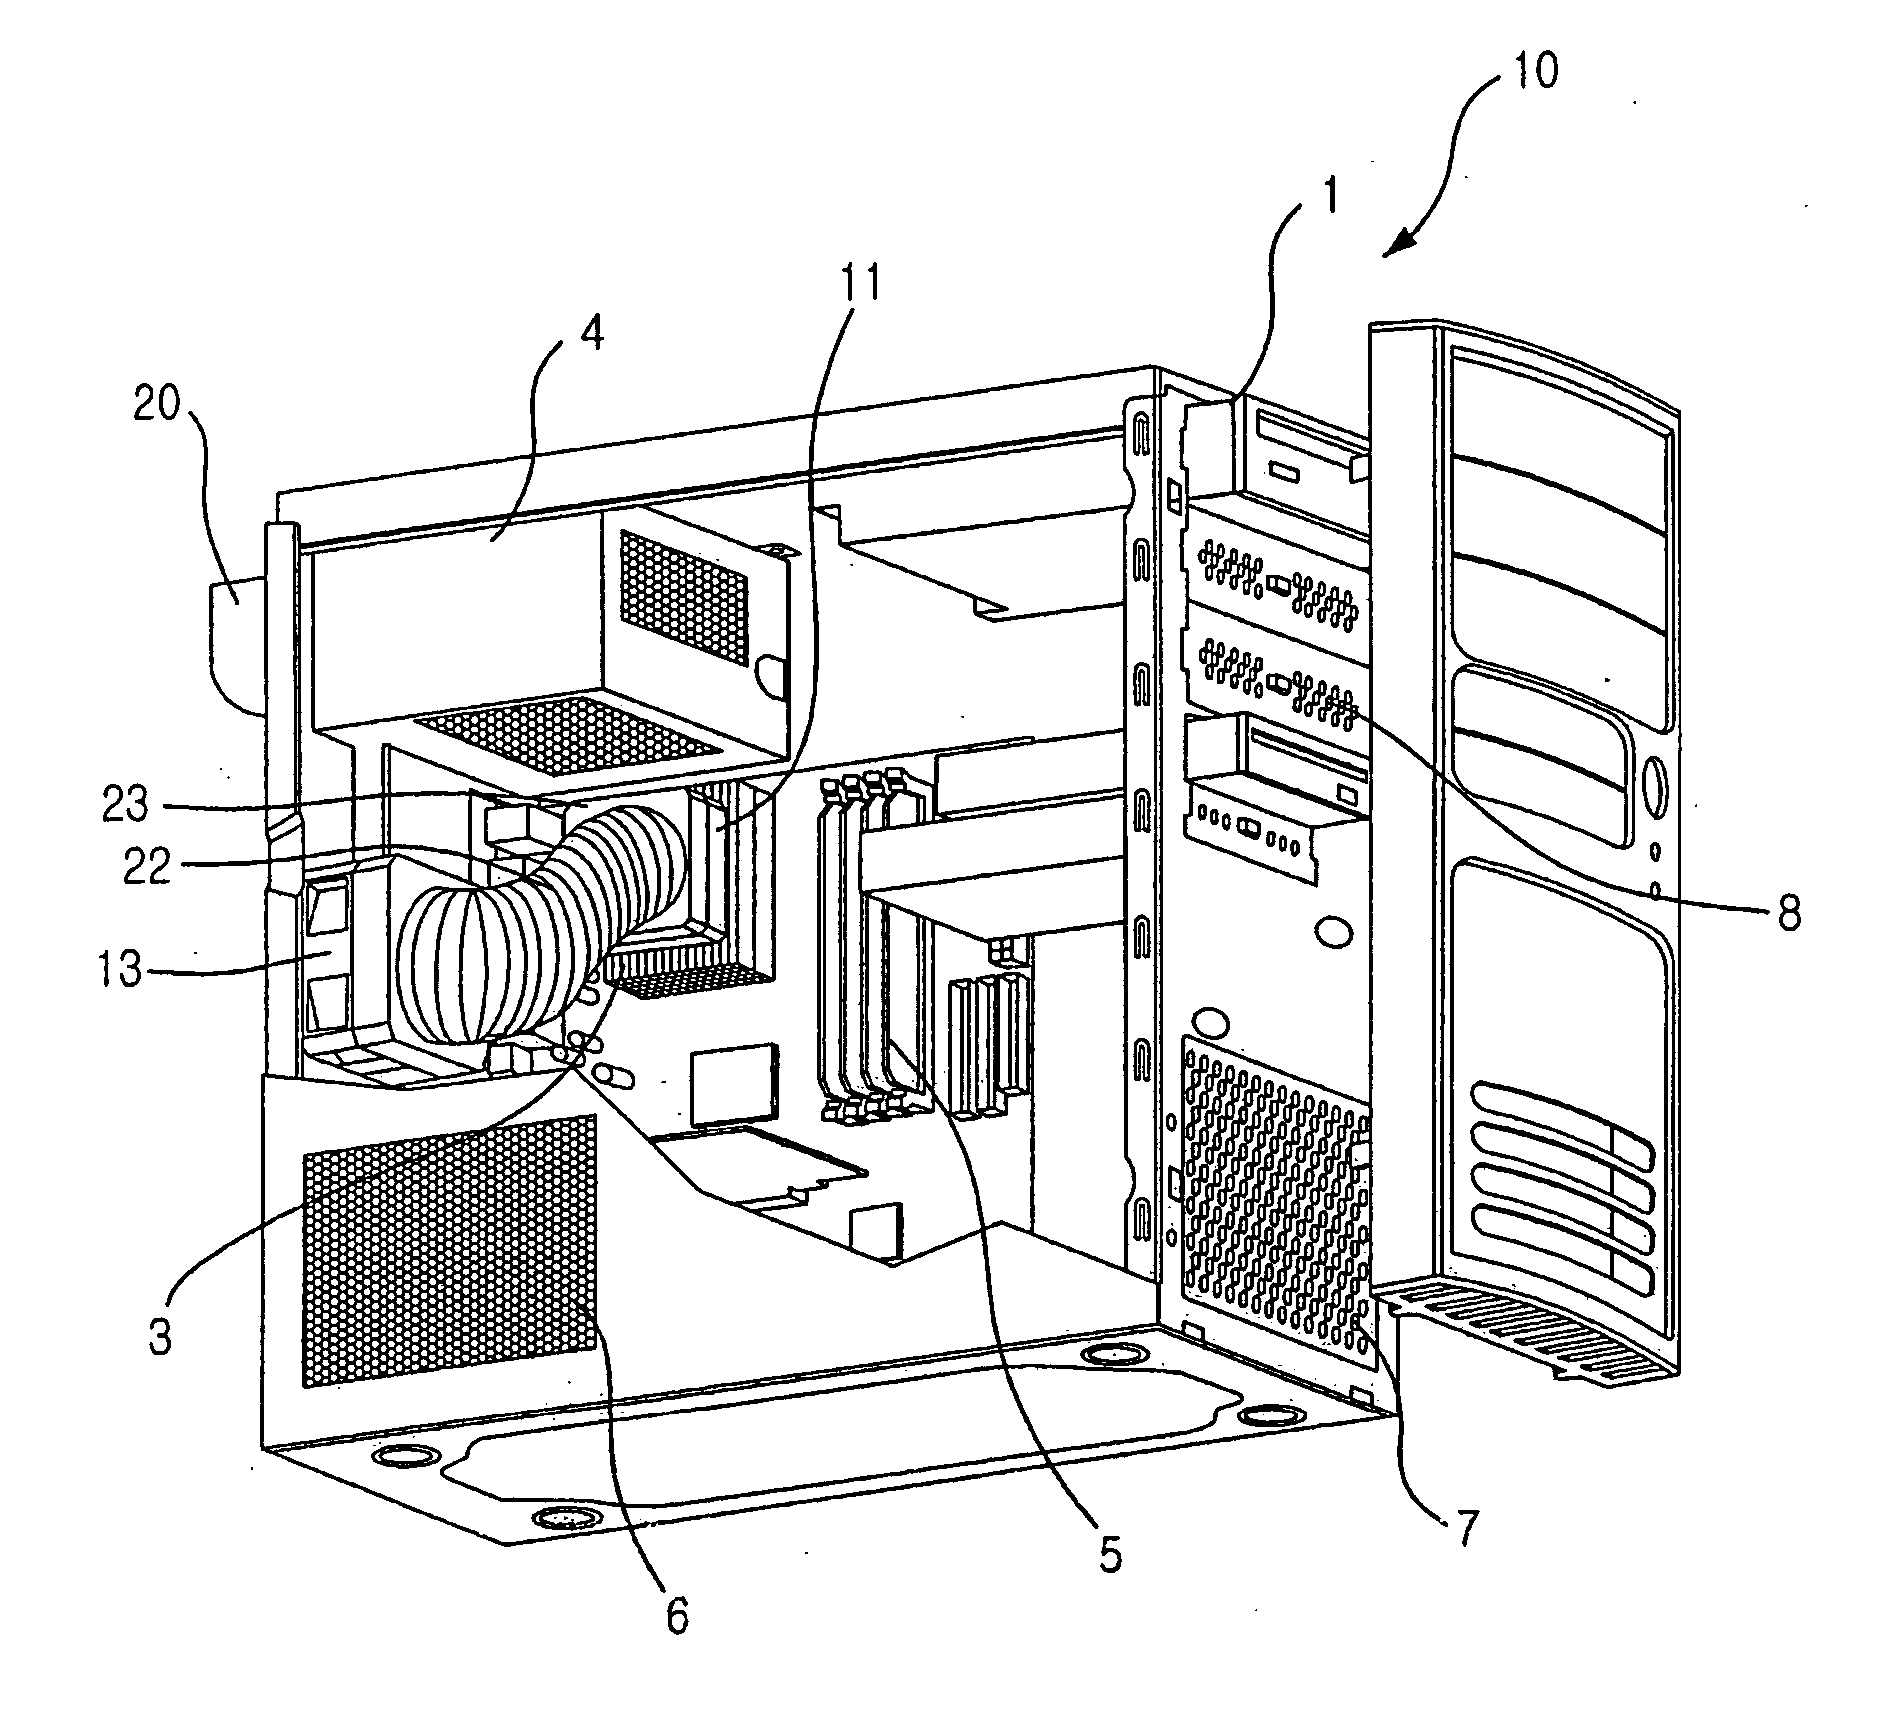 Cooling system for electric element of personal computer